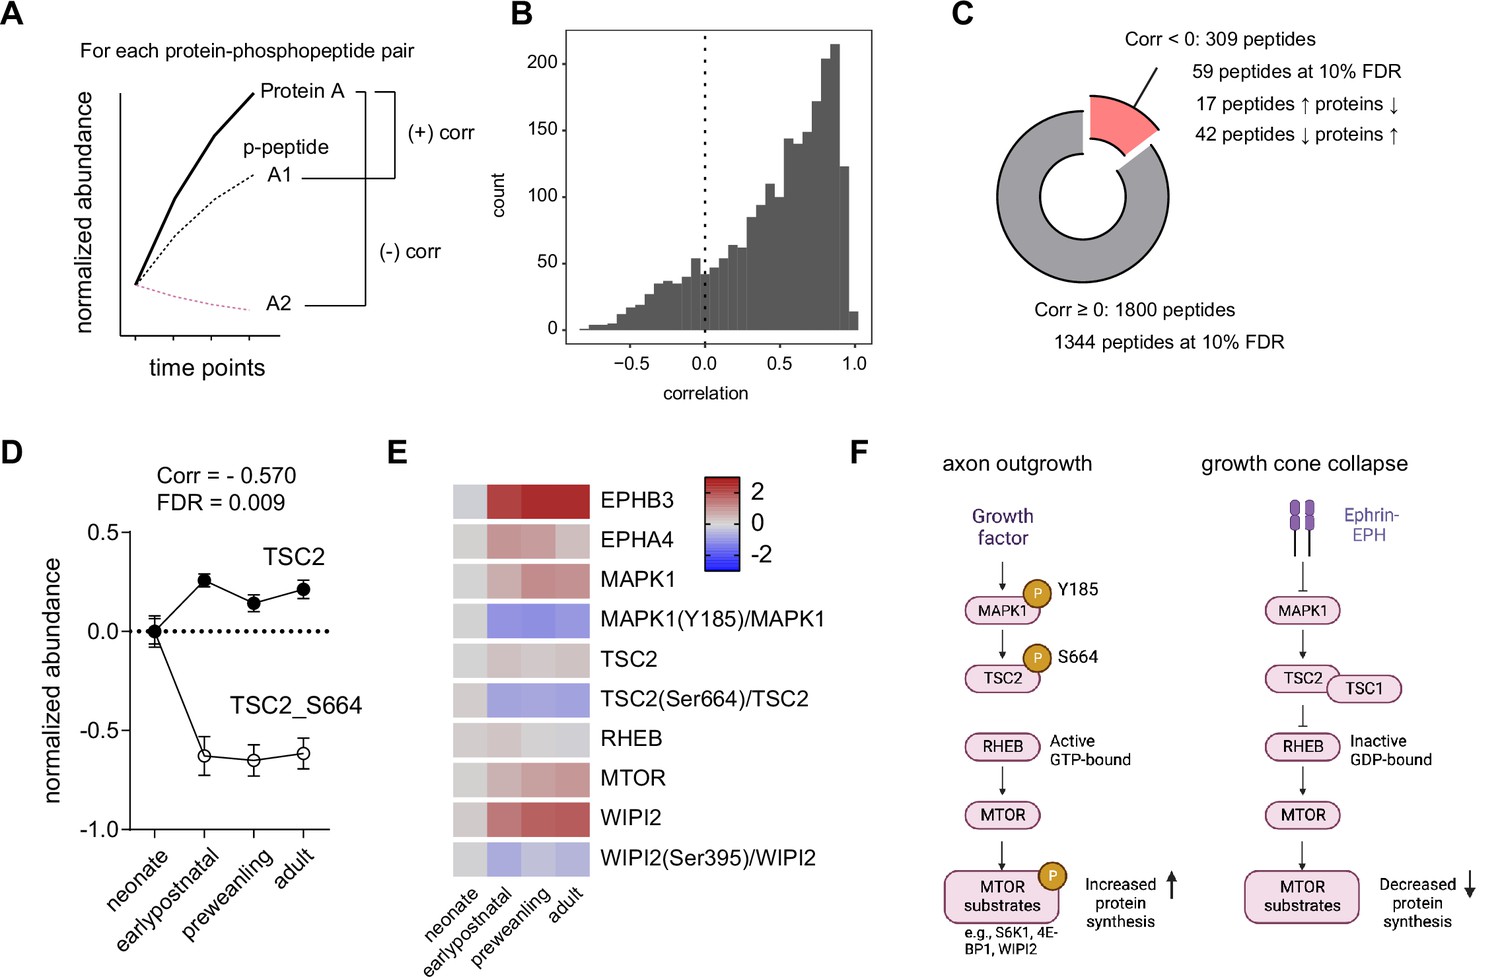 Synapse type-specific proteomic dissection identifies IgSF8 as a